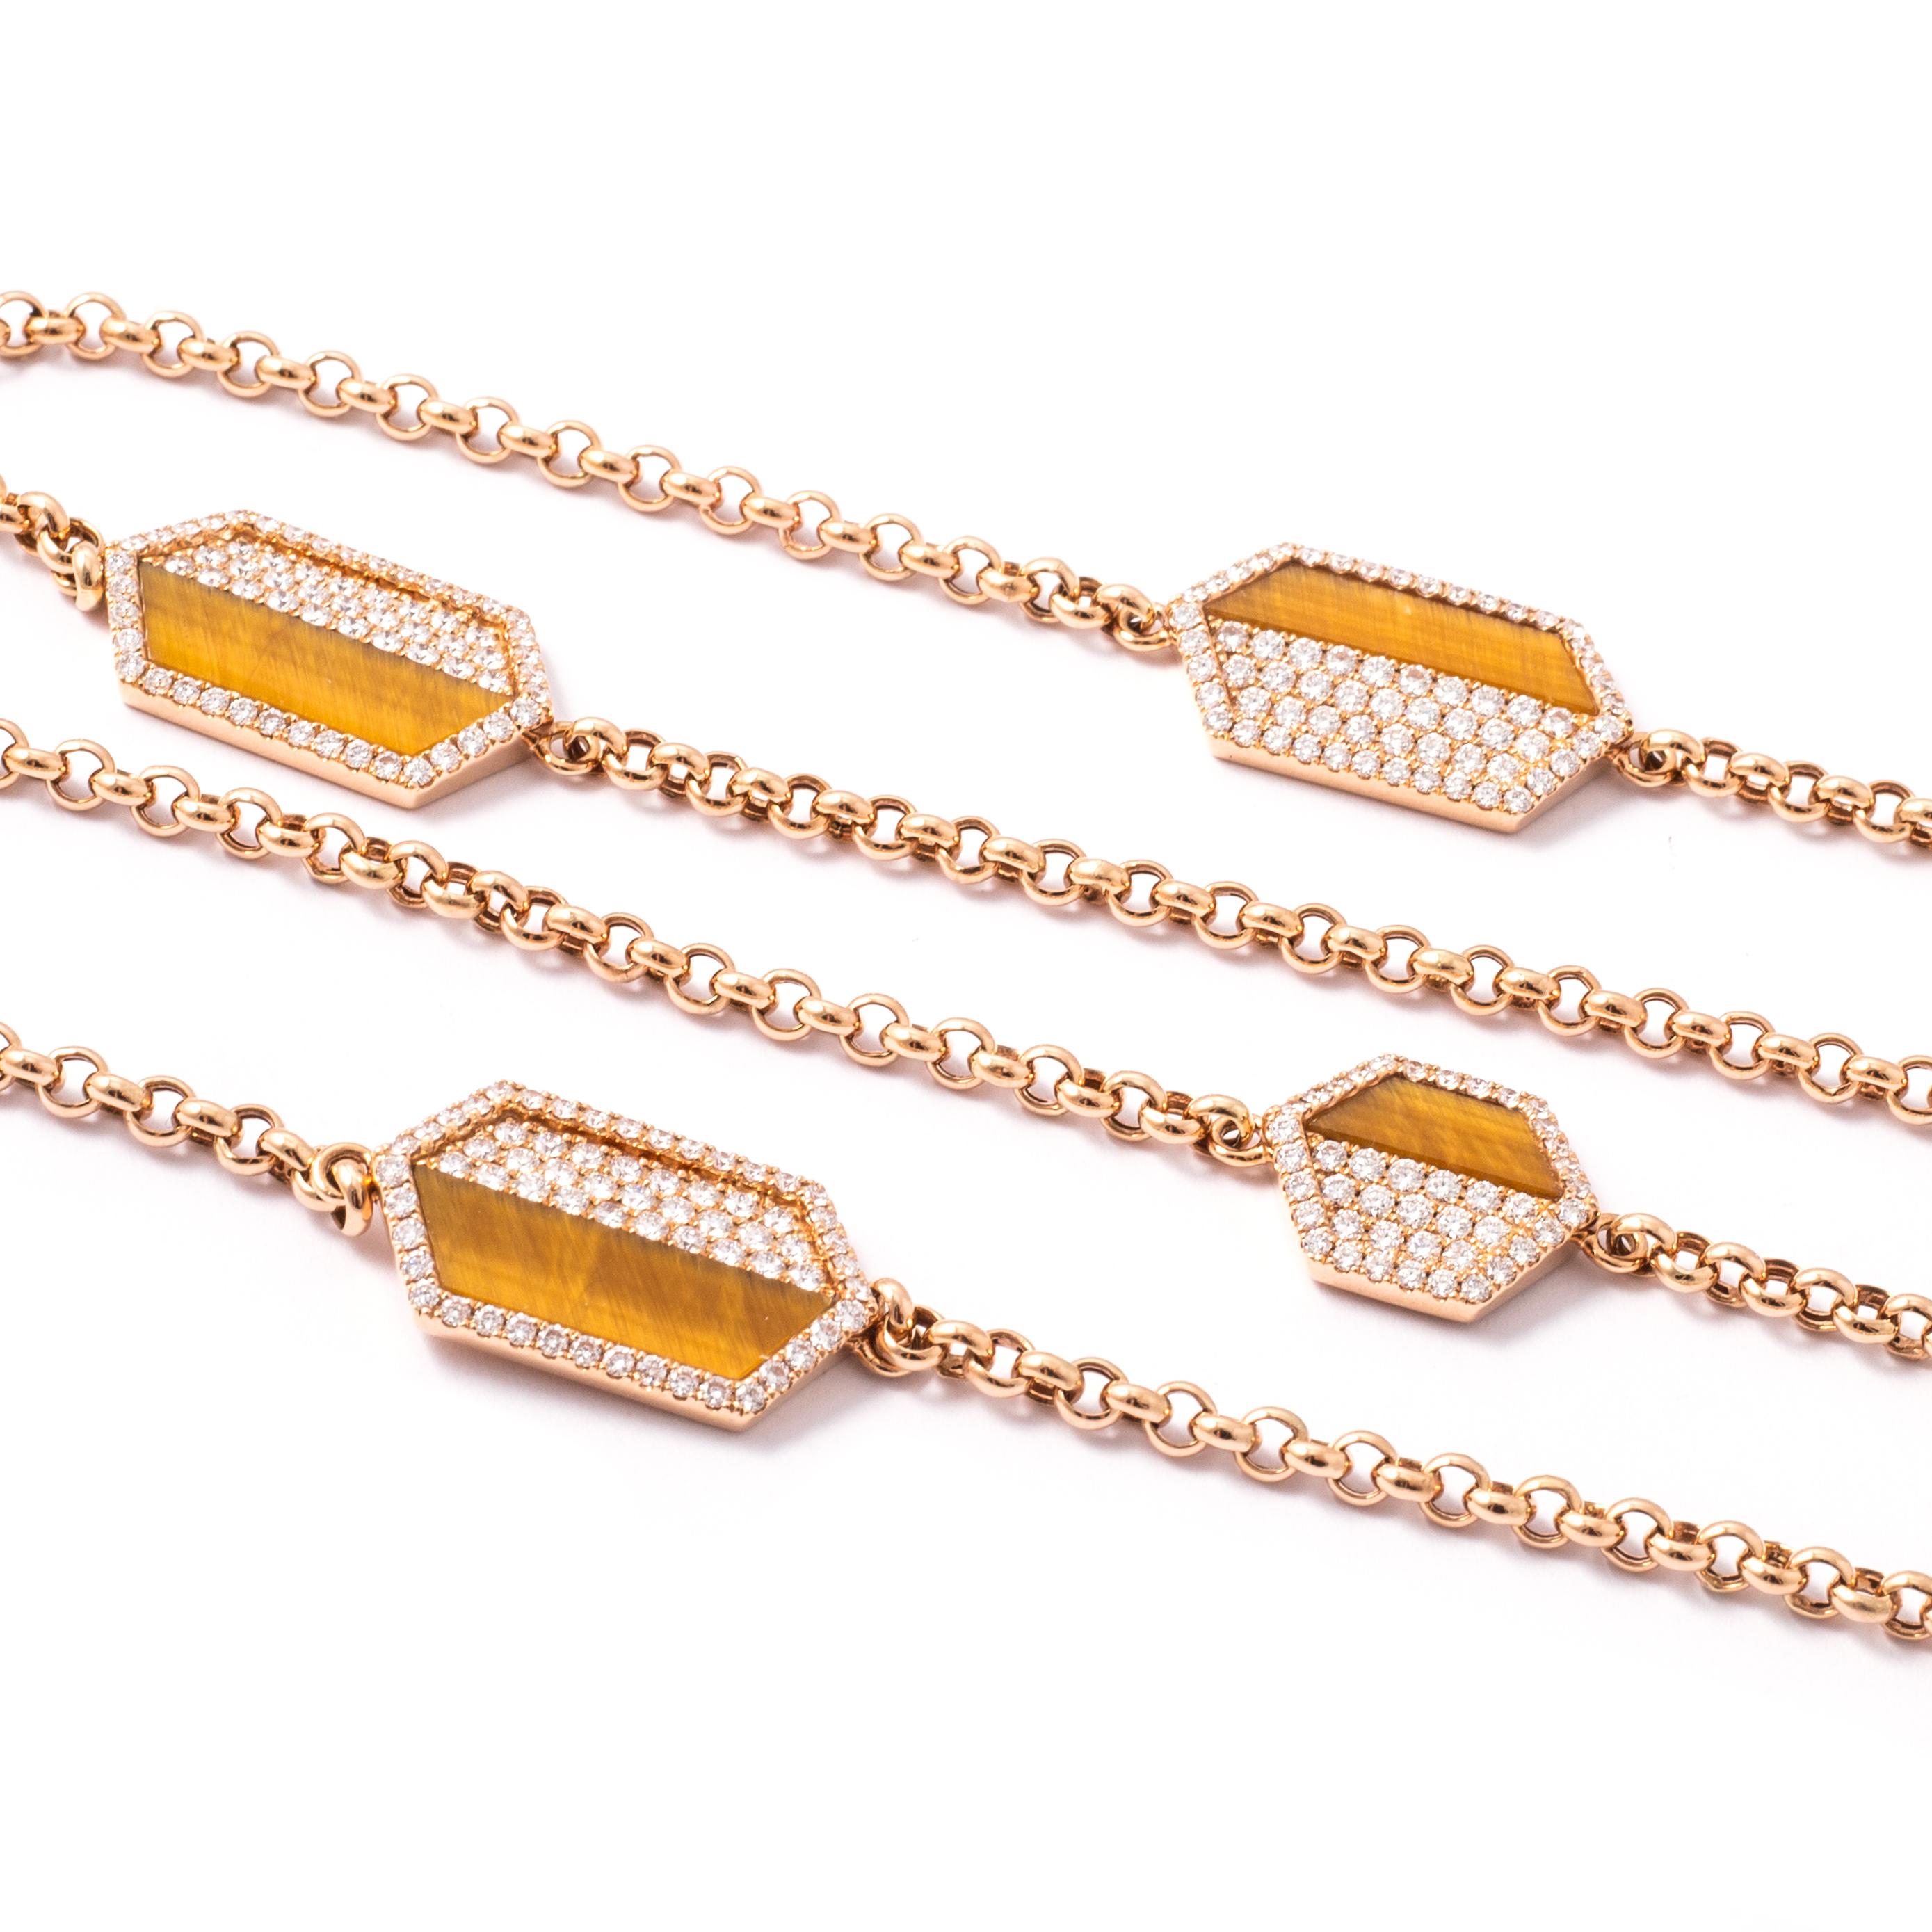 Necklace in 18kt pink gold set with 562 diamonds 6.14 cts and 10 tiger eye 15.44 cts